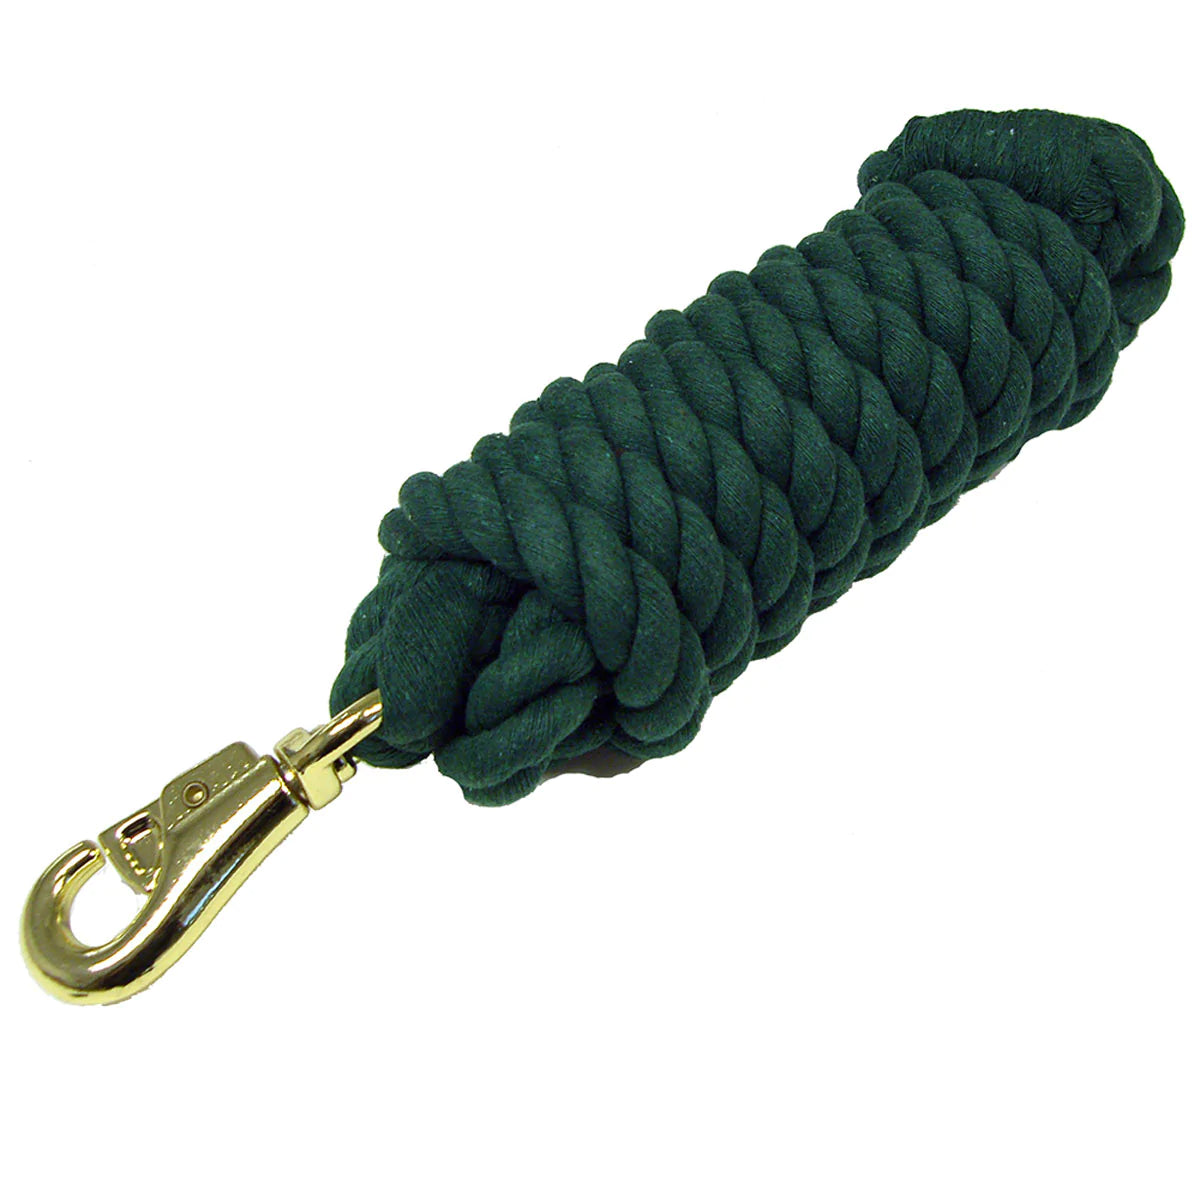 HEAVY DUTY COTTON LEAD ROPE W/ BRASS PLATED BULL SNAP